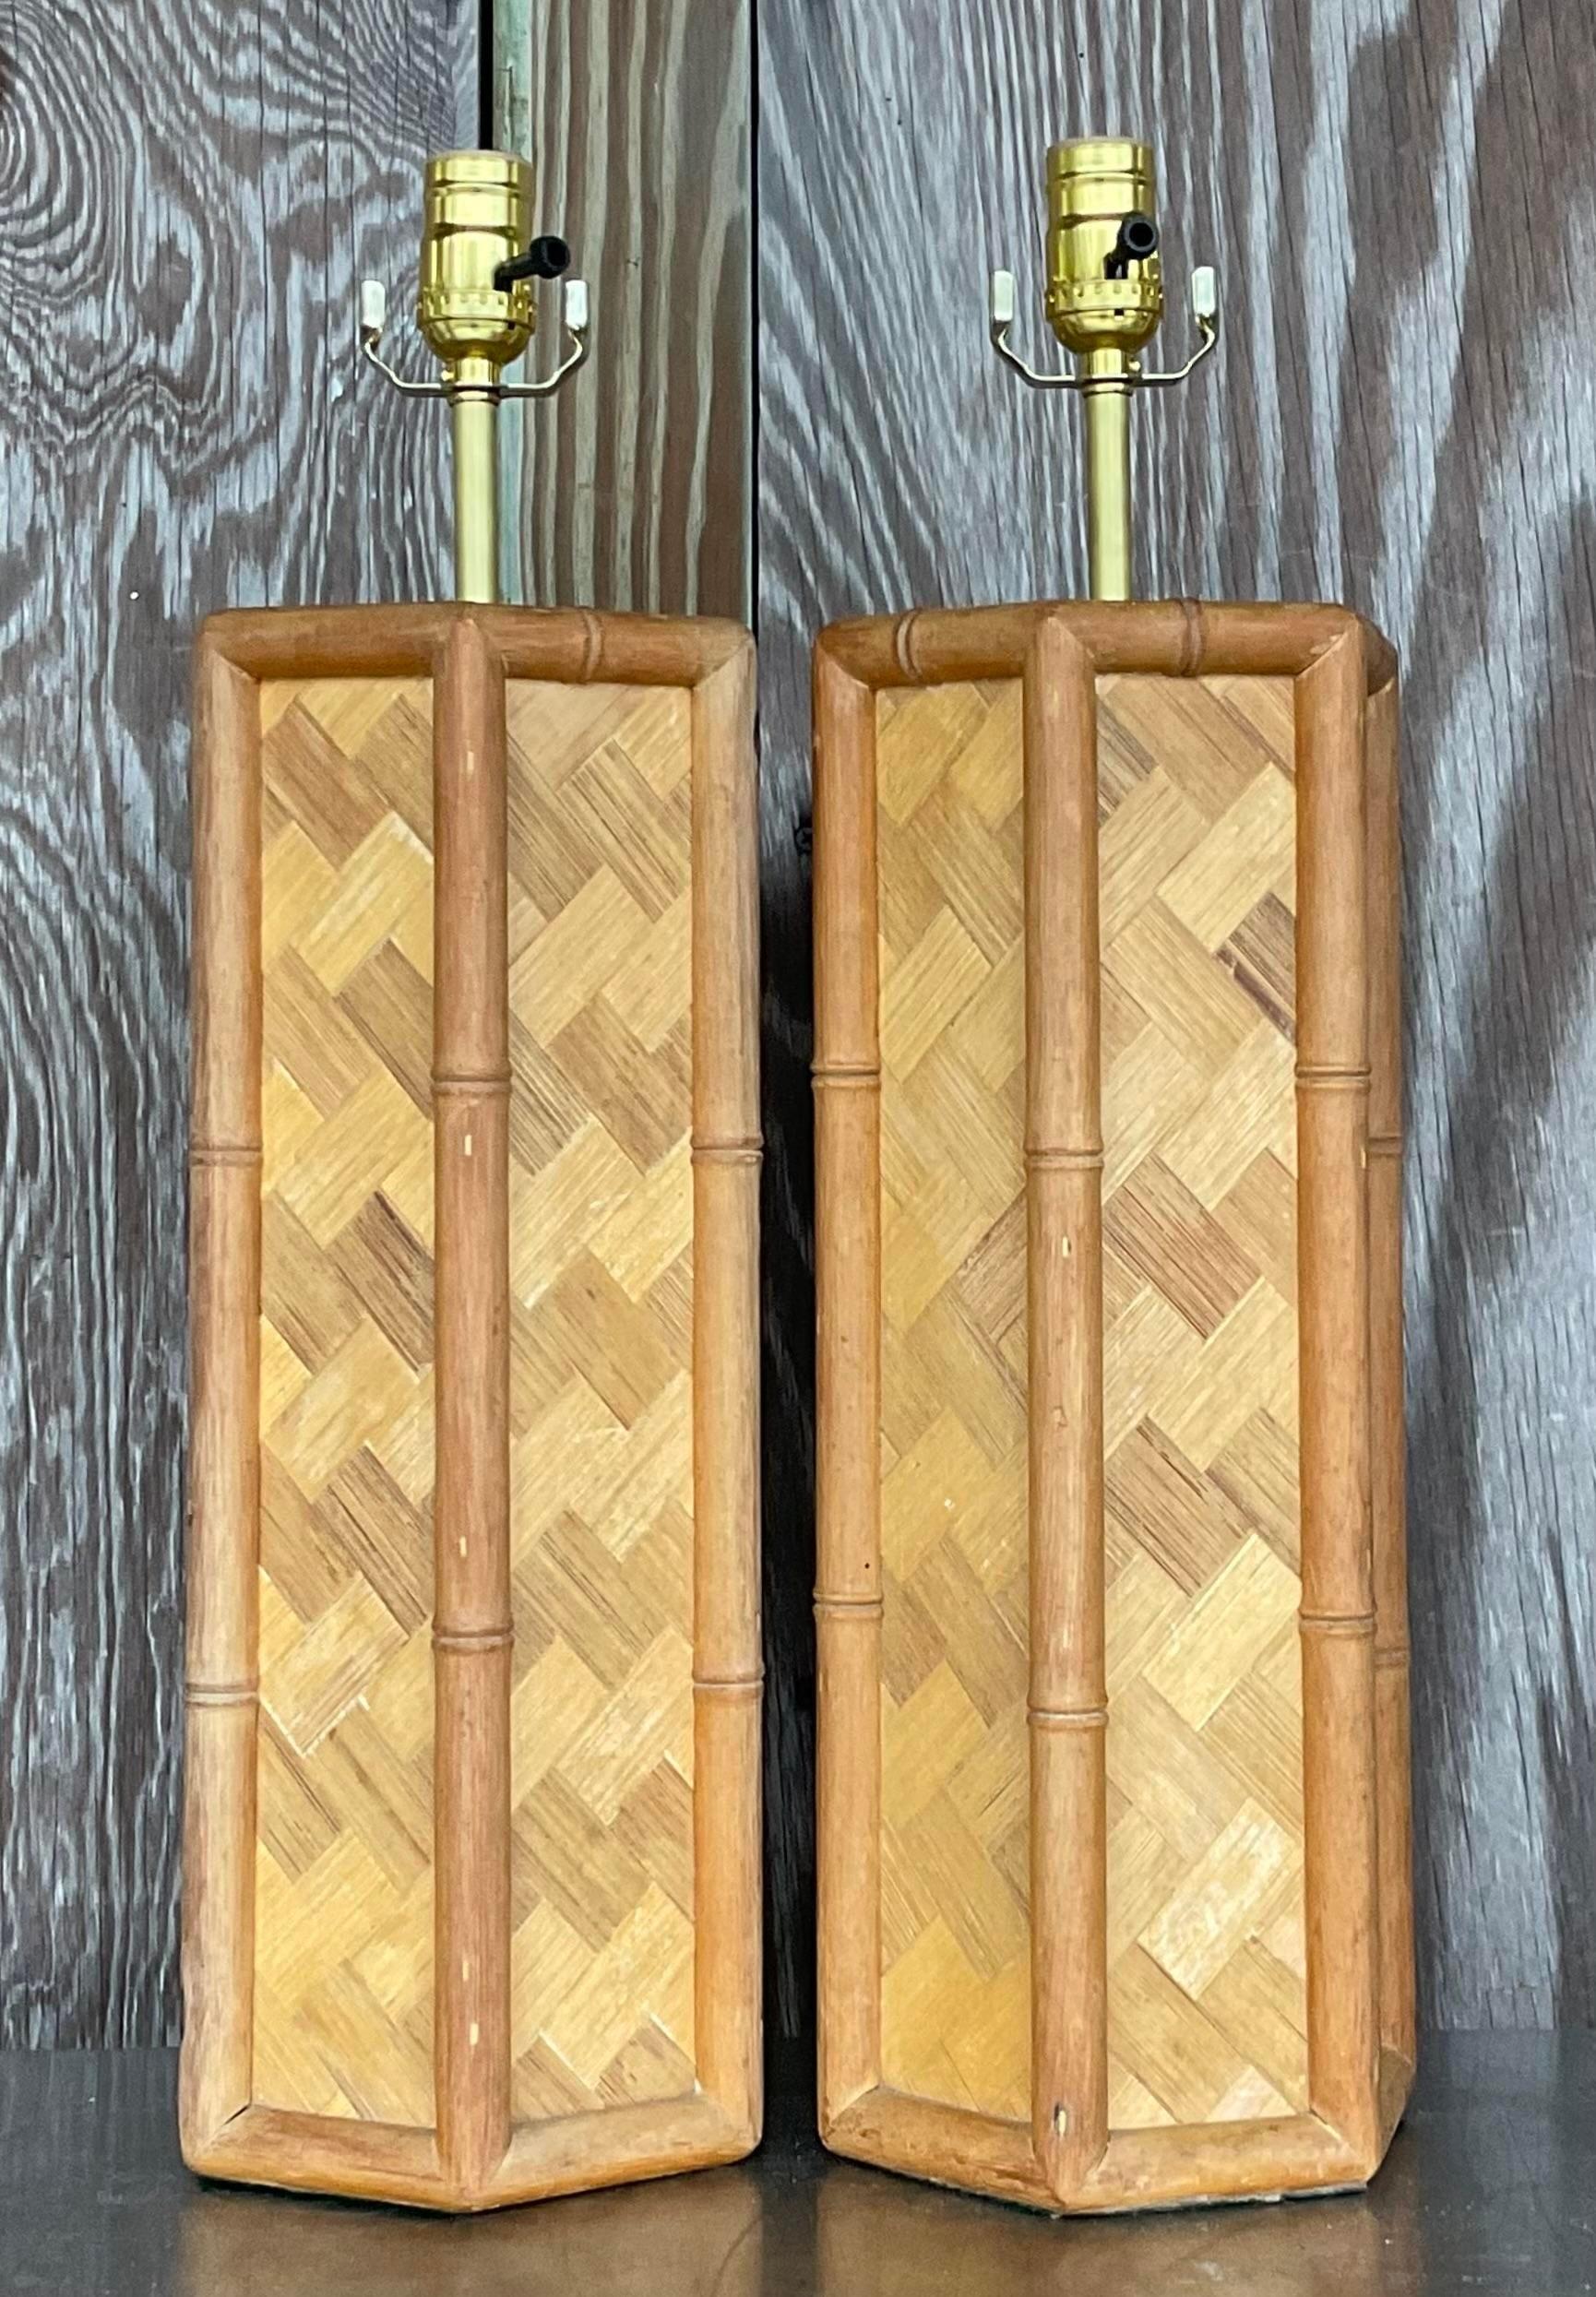 A fabulous pair of vintage Coastal table lamps. A chic parquet rattan in a cool hexagon shape. Trimmed in full rattan. Fully restored with all new wiring and hardware. Acquired from a Palm Beach estate.